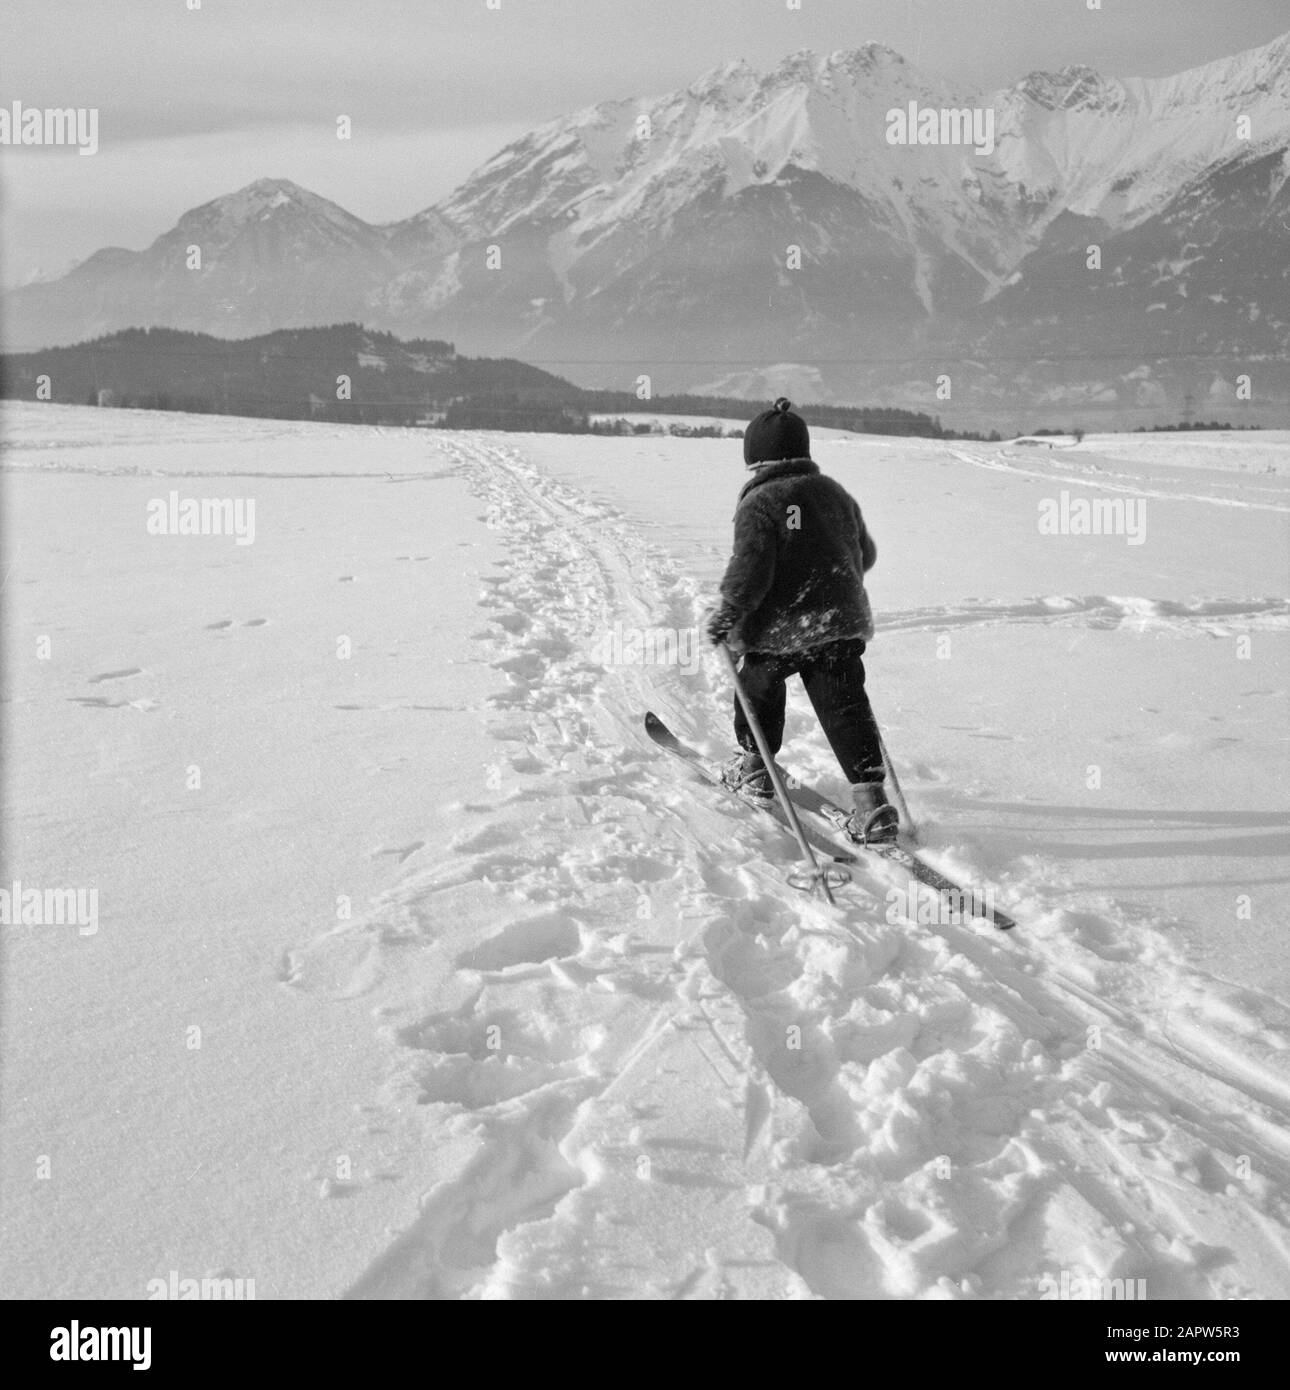 Winter in Tyrol  Child with skis in the snow with the Karwendel Mountains in the background Date: January 1960 Location: Austria, Sistrans, Tyrol Keywords: mountains, landscapes, cross-country skiing, skiing, snow, winter, winter sports Stock Photo